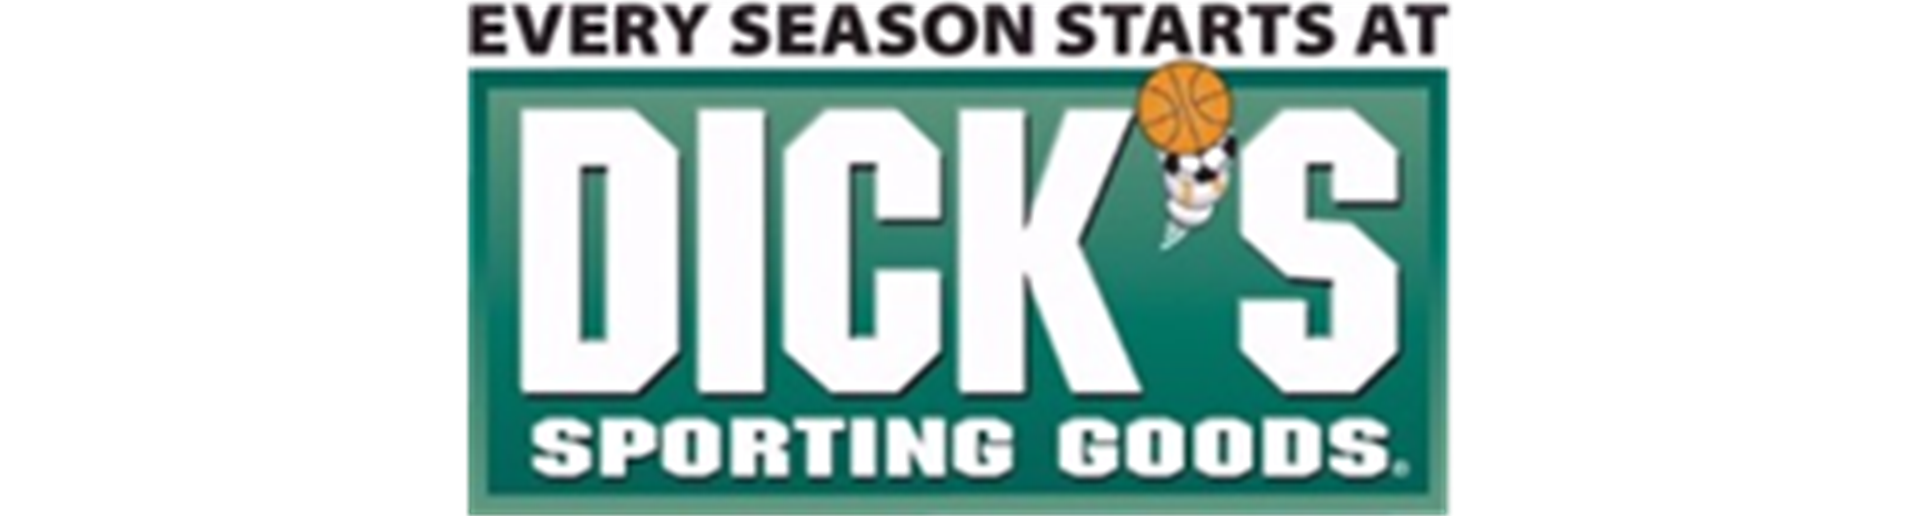 Dick's Sporting Goods 20% OFF